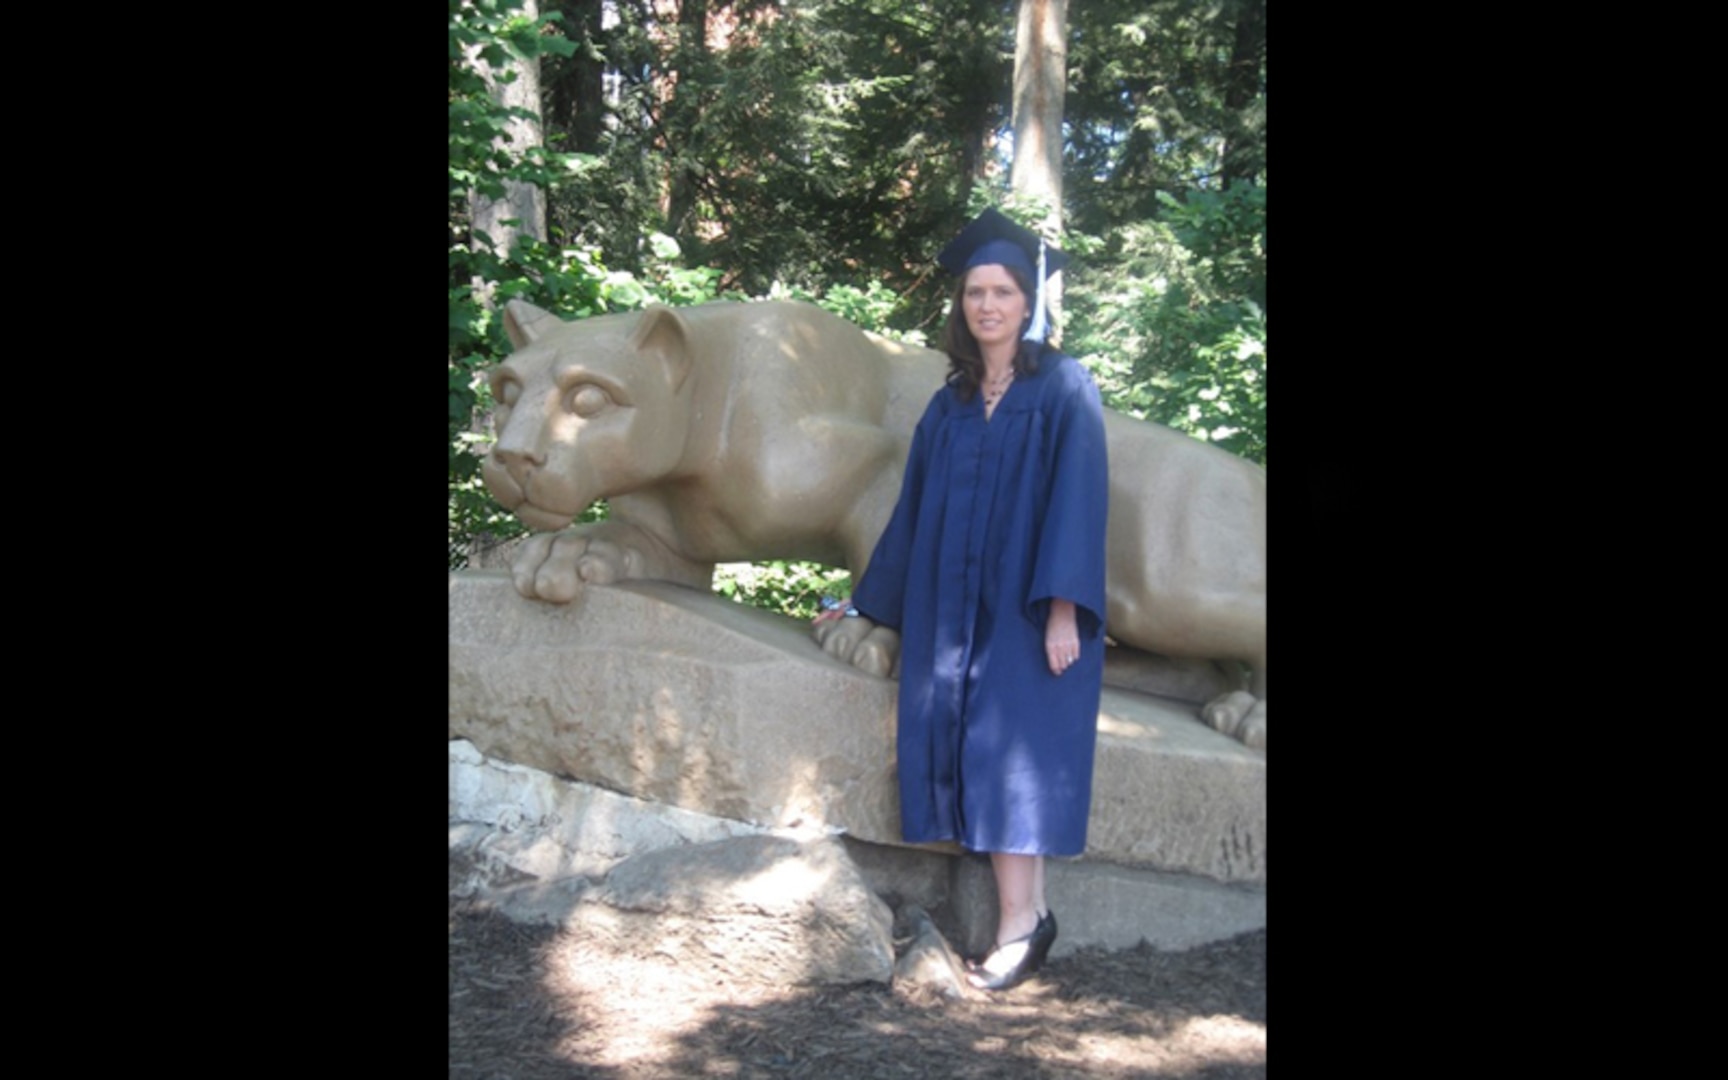 A woman wears her blue graduation cap and gown